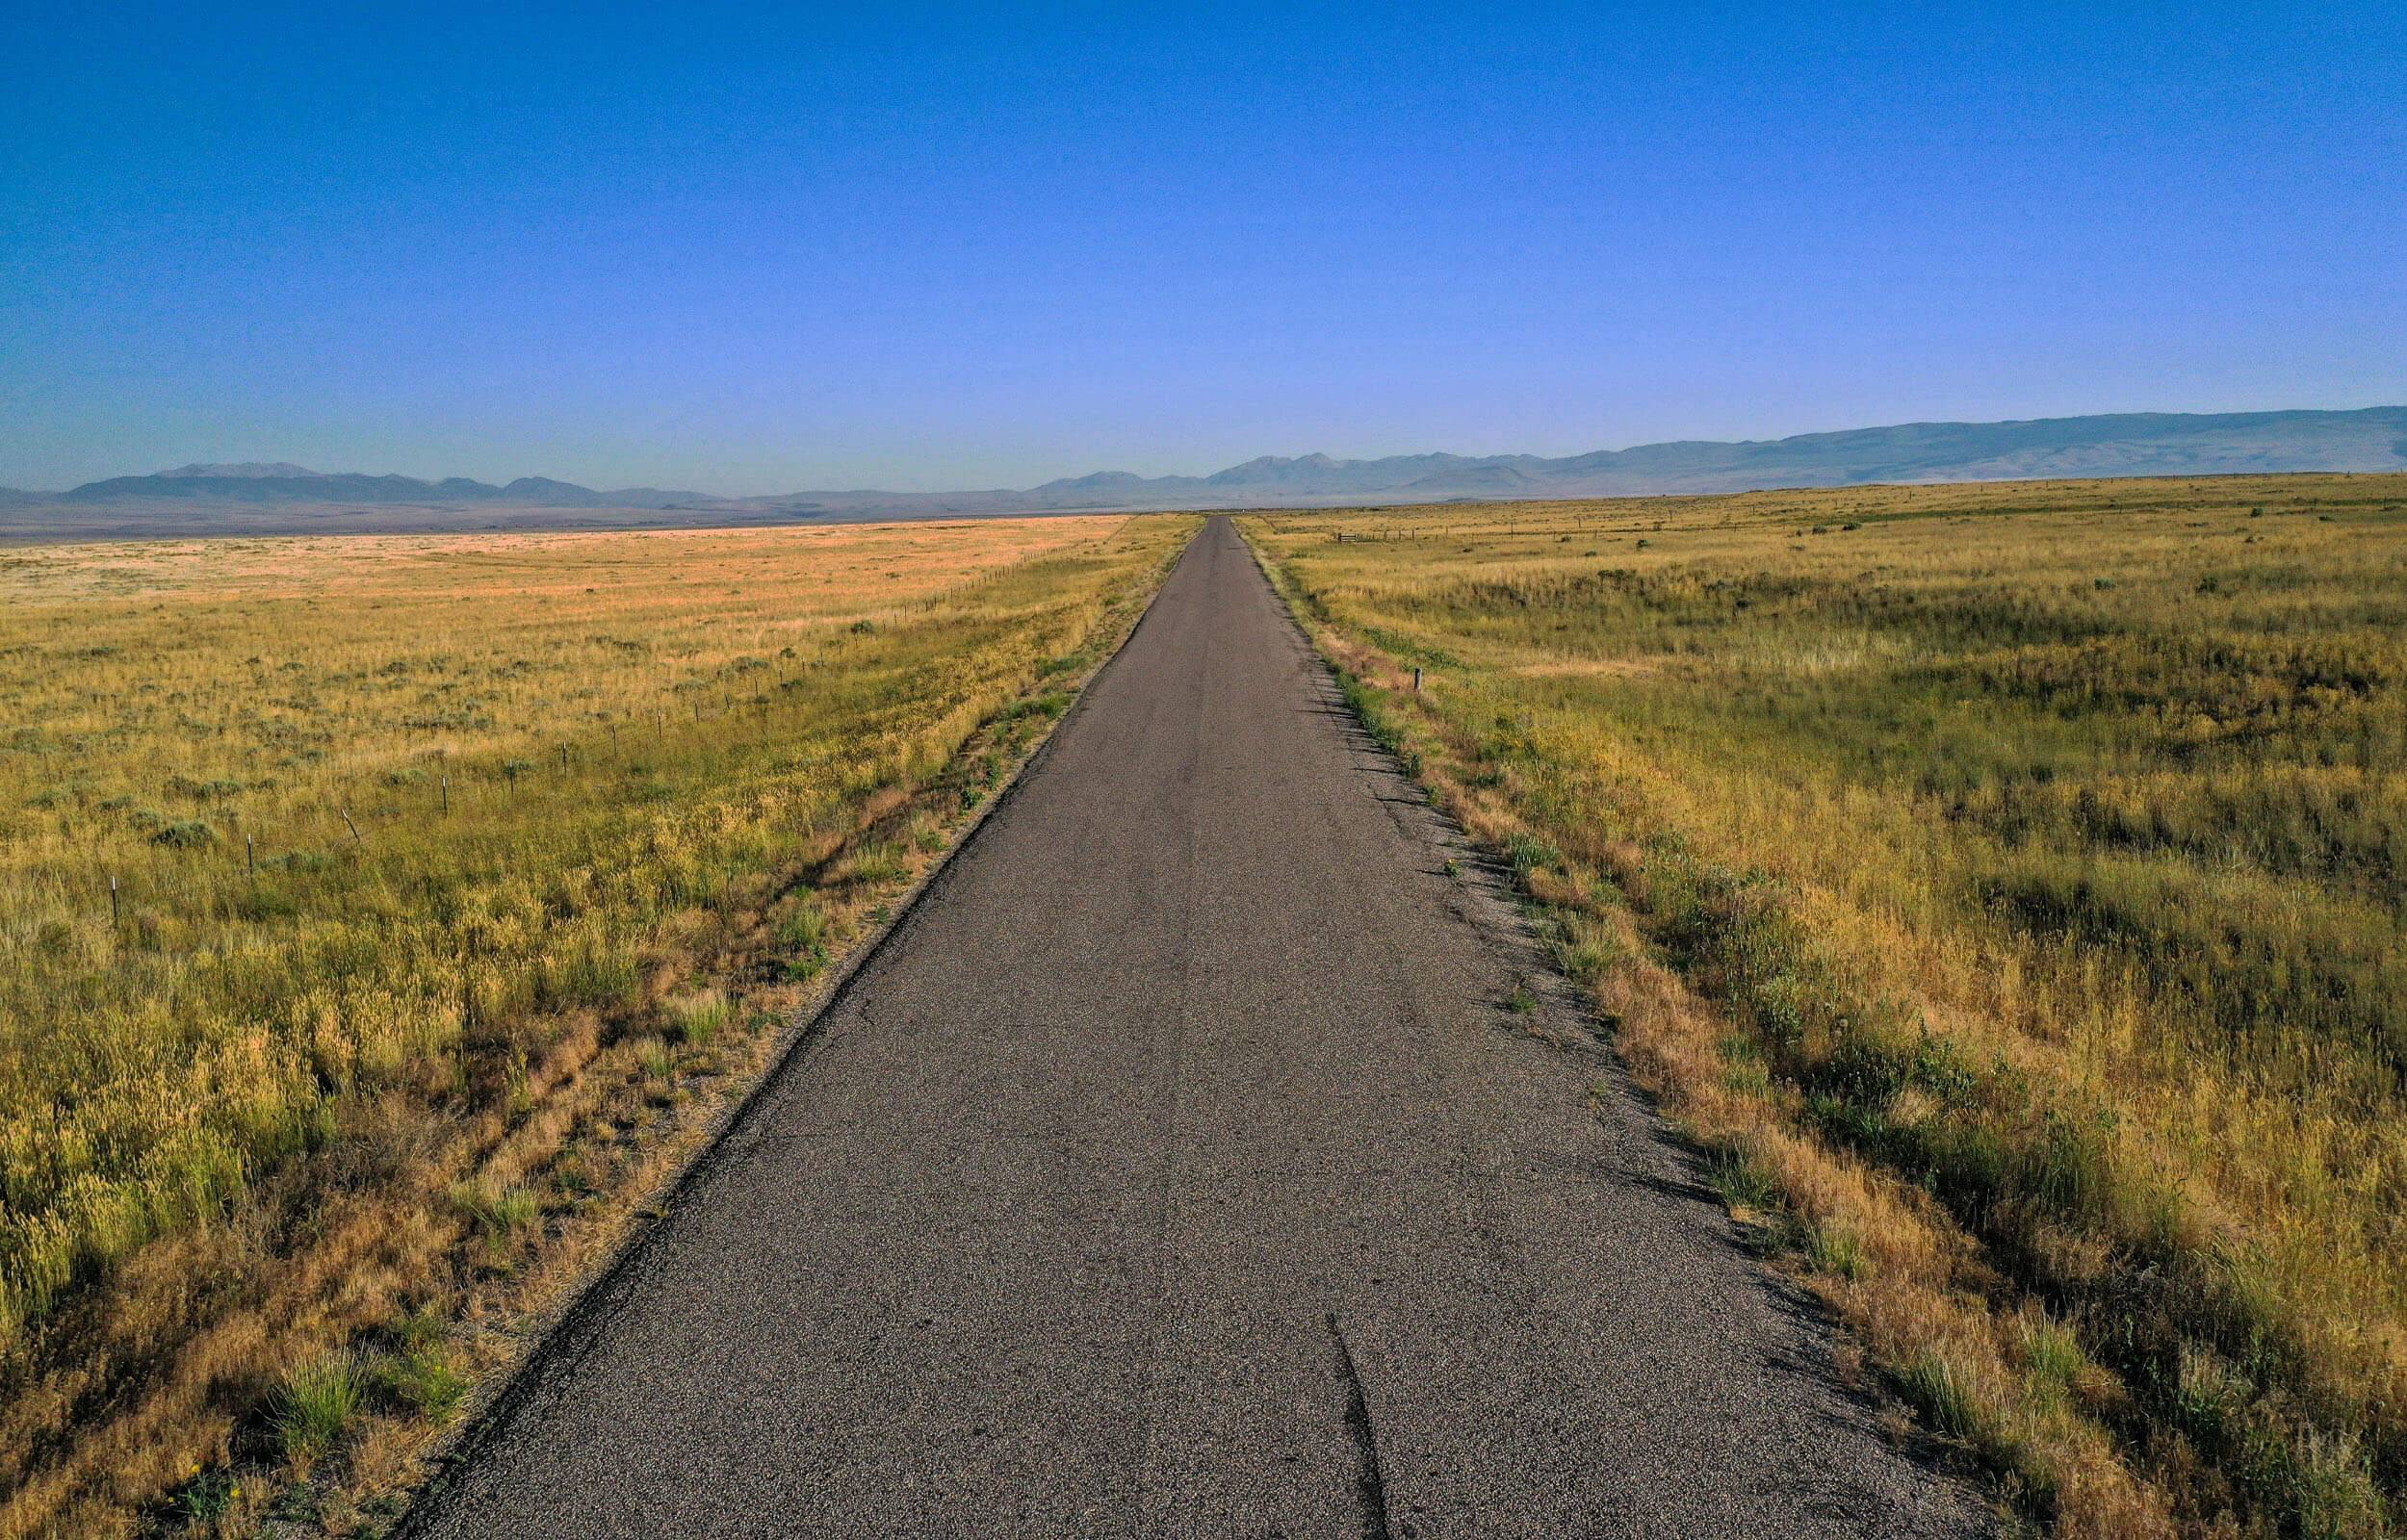 A single lane road surrounded by plains along the Lost Gold Trails Loop.